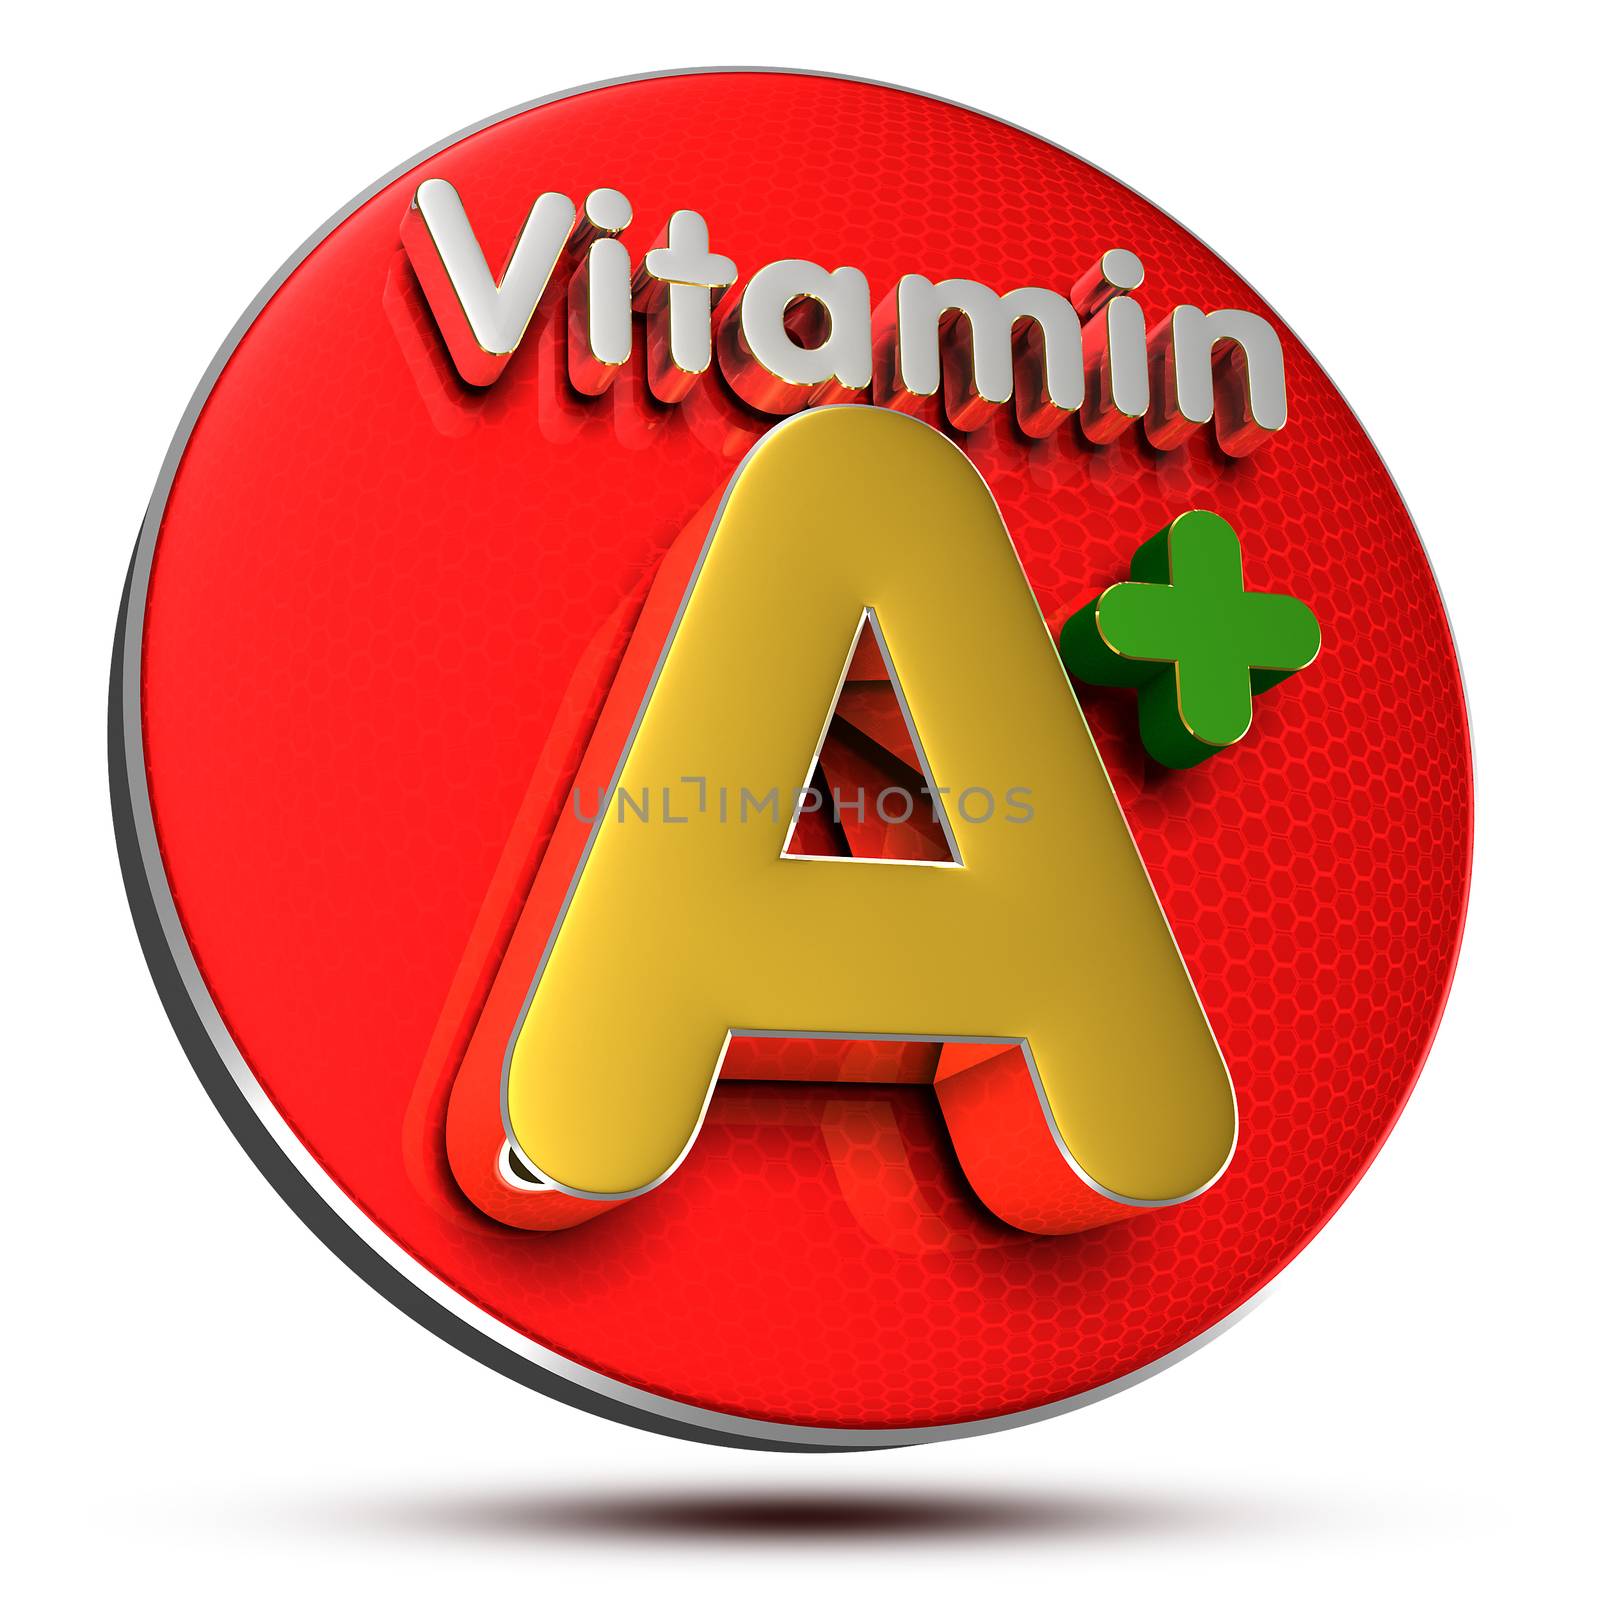 Vitamin A 3D rendering on white background.(with Clipping Path).